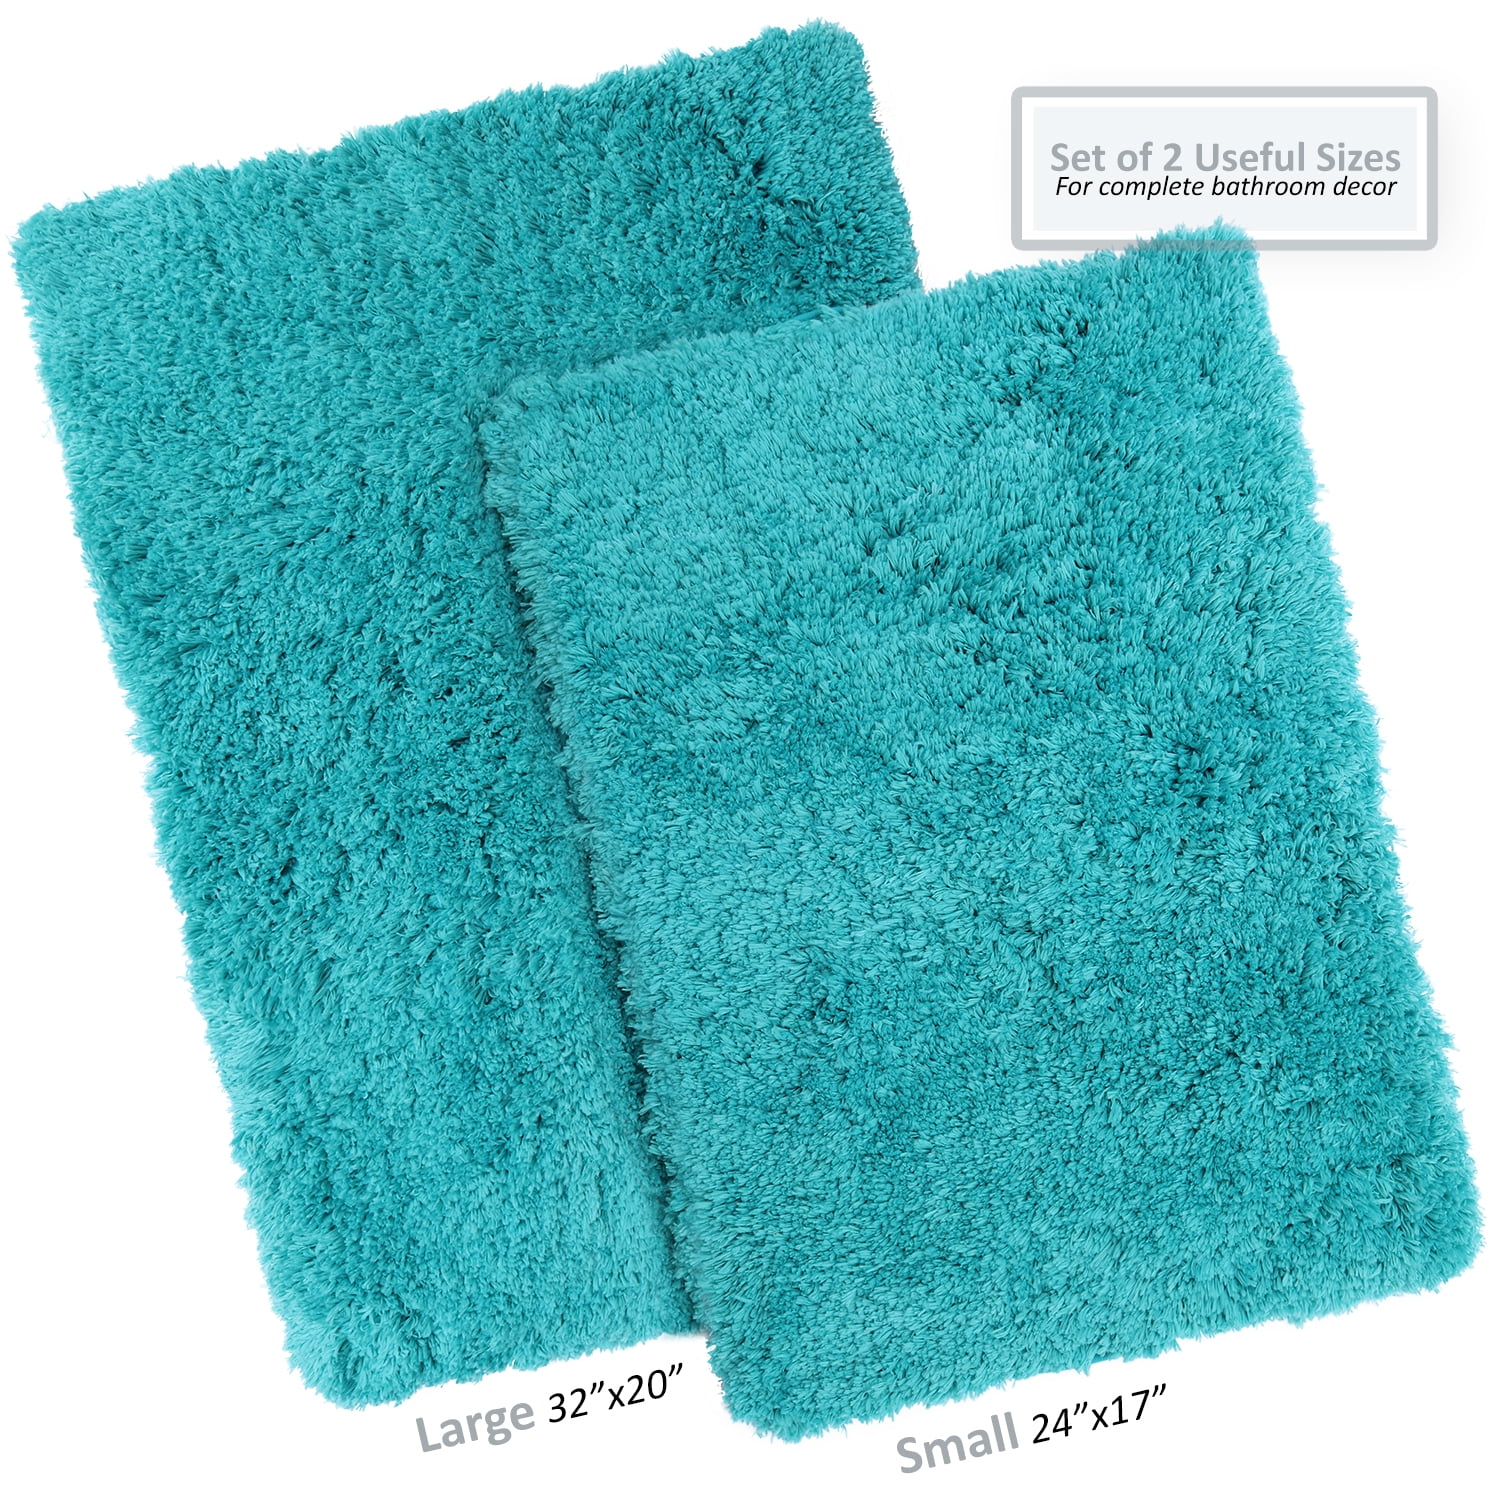 OEAKAY Bath Mat Bathroom Rug Absorbent Non-Slip Washable Shower Floor Mats  Small Carpet 24x43,Turquoise Teal and White 